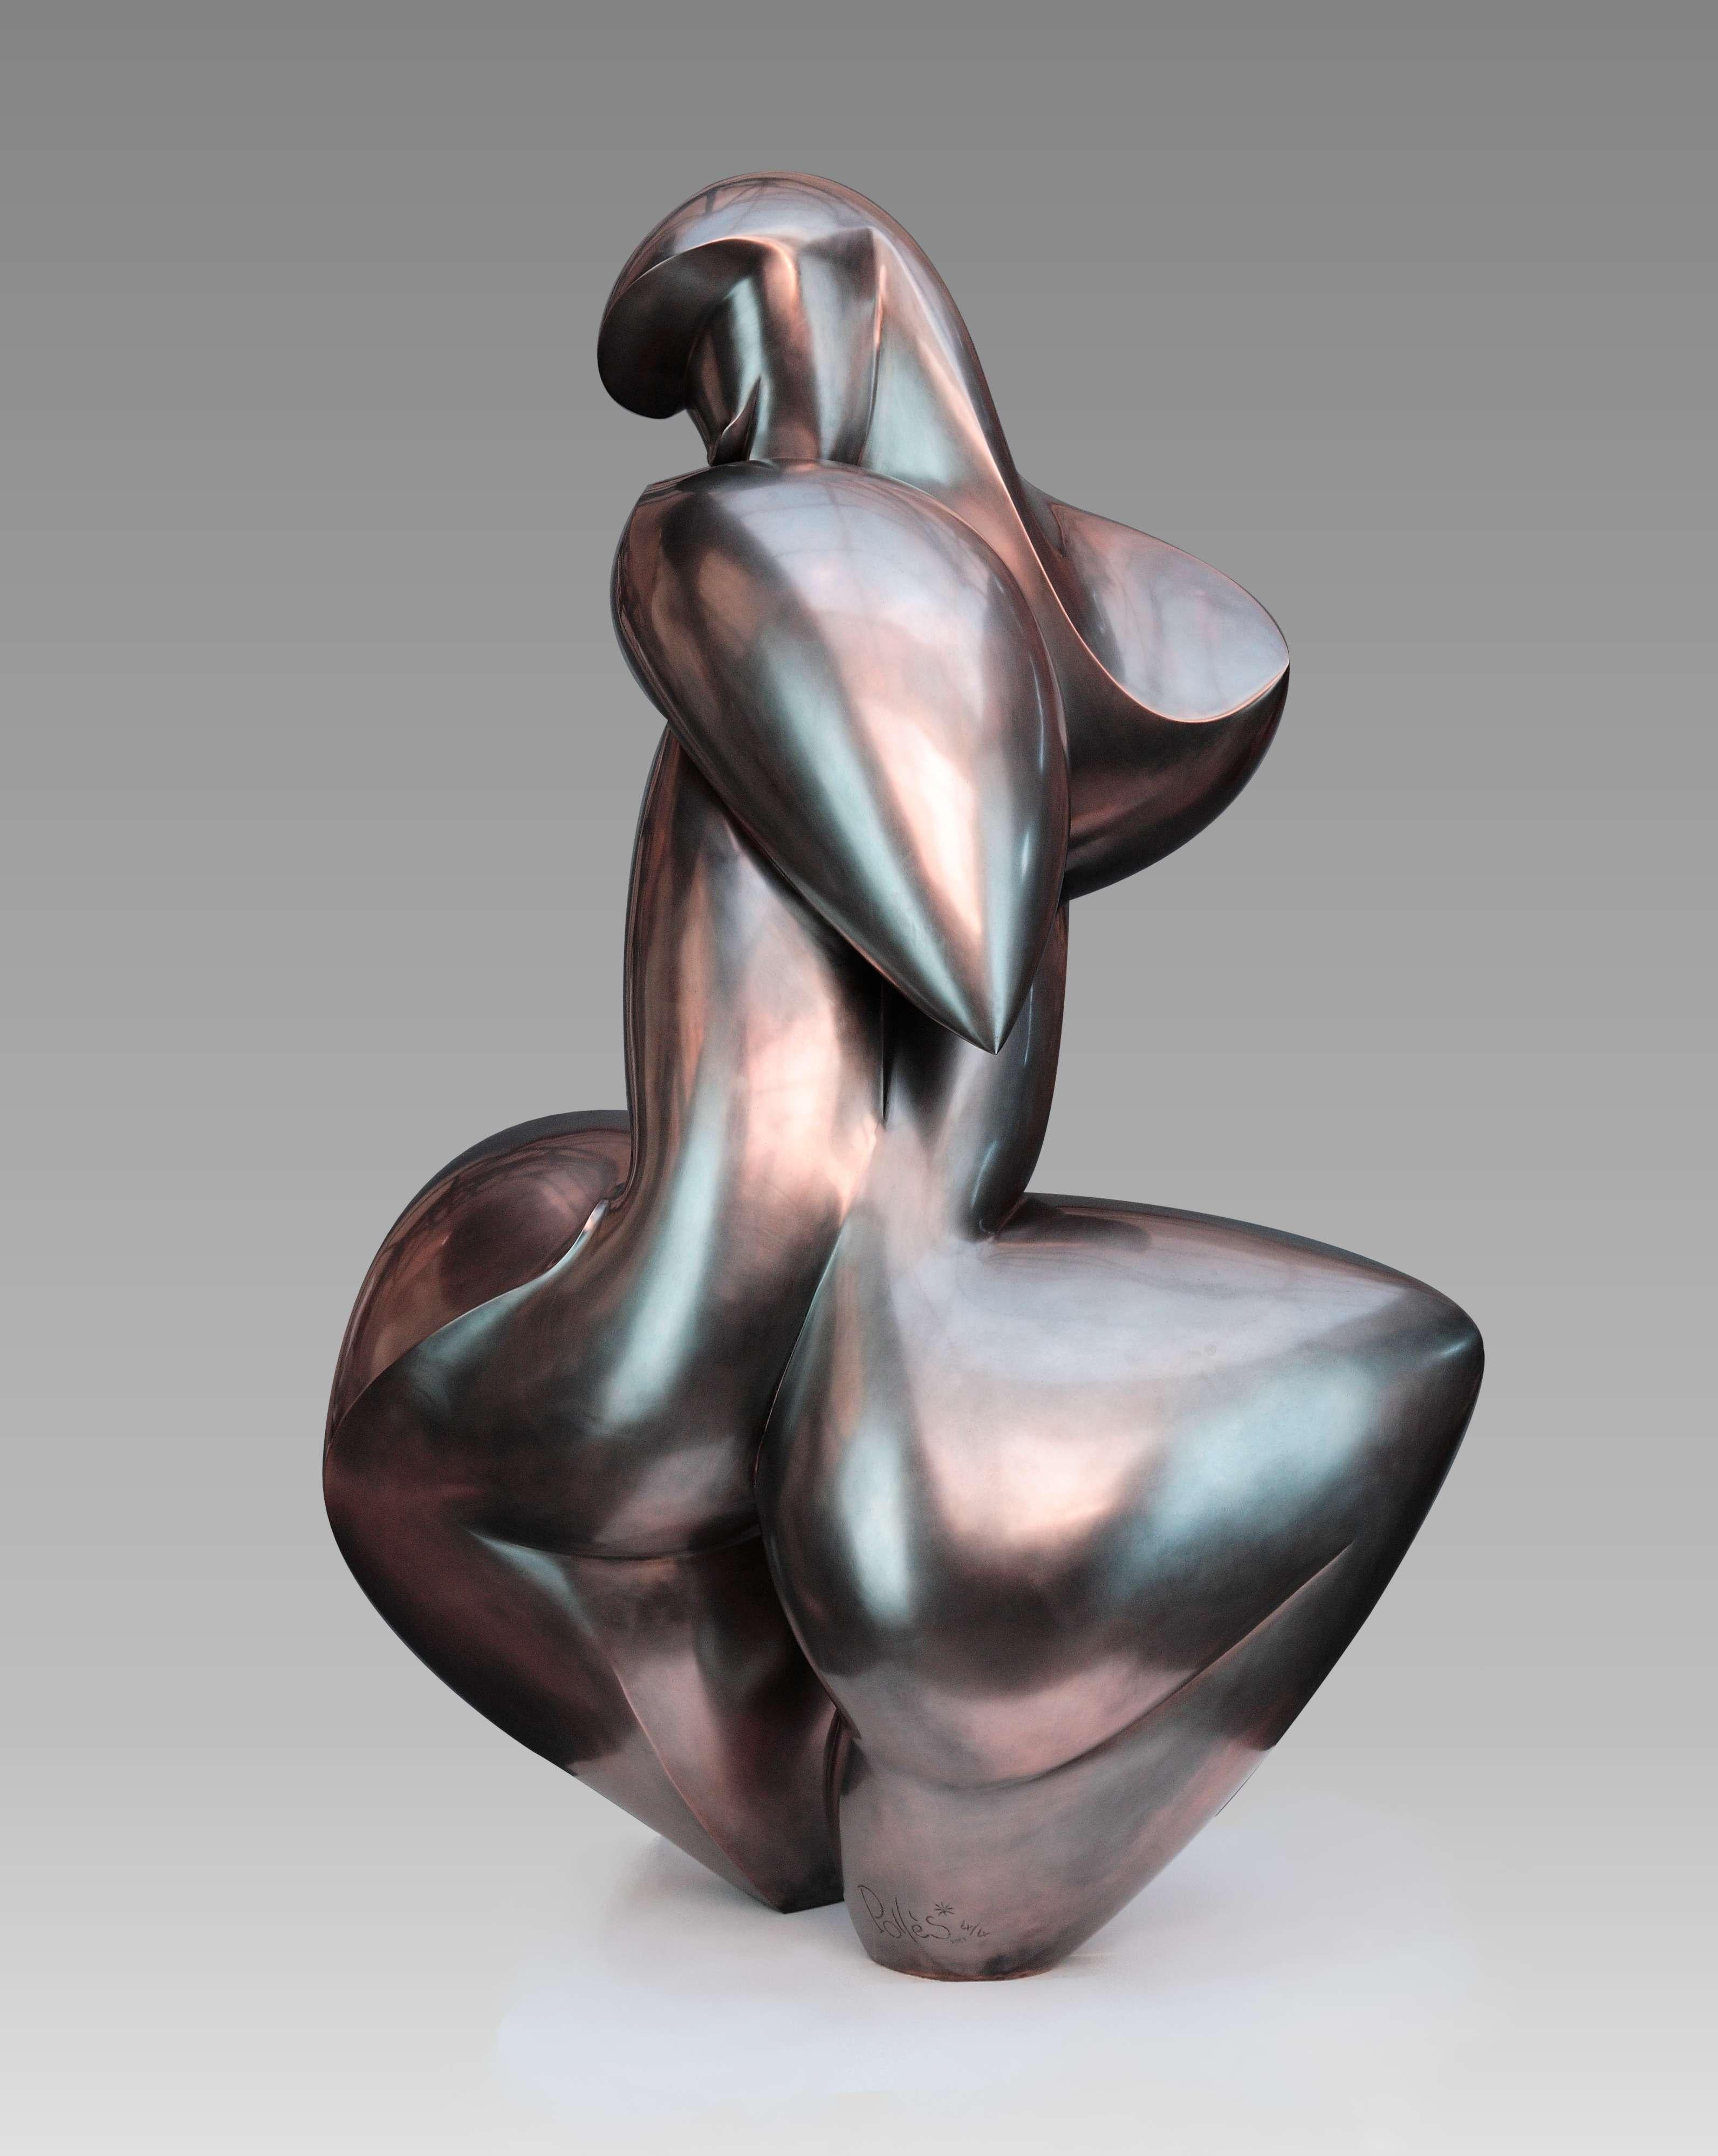 Dominique Pollès, 
1945, French

Yterbine, 1998
Bronze with pink platinium patina
Signed, dated and numbered 4/4

Certificate by the Artist

Dimension: 47 1/4